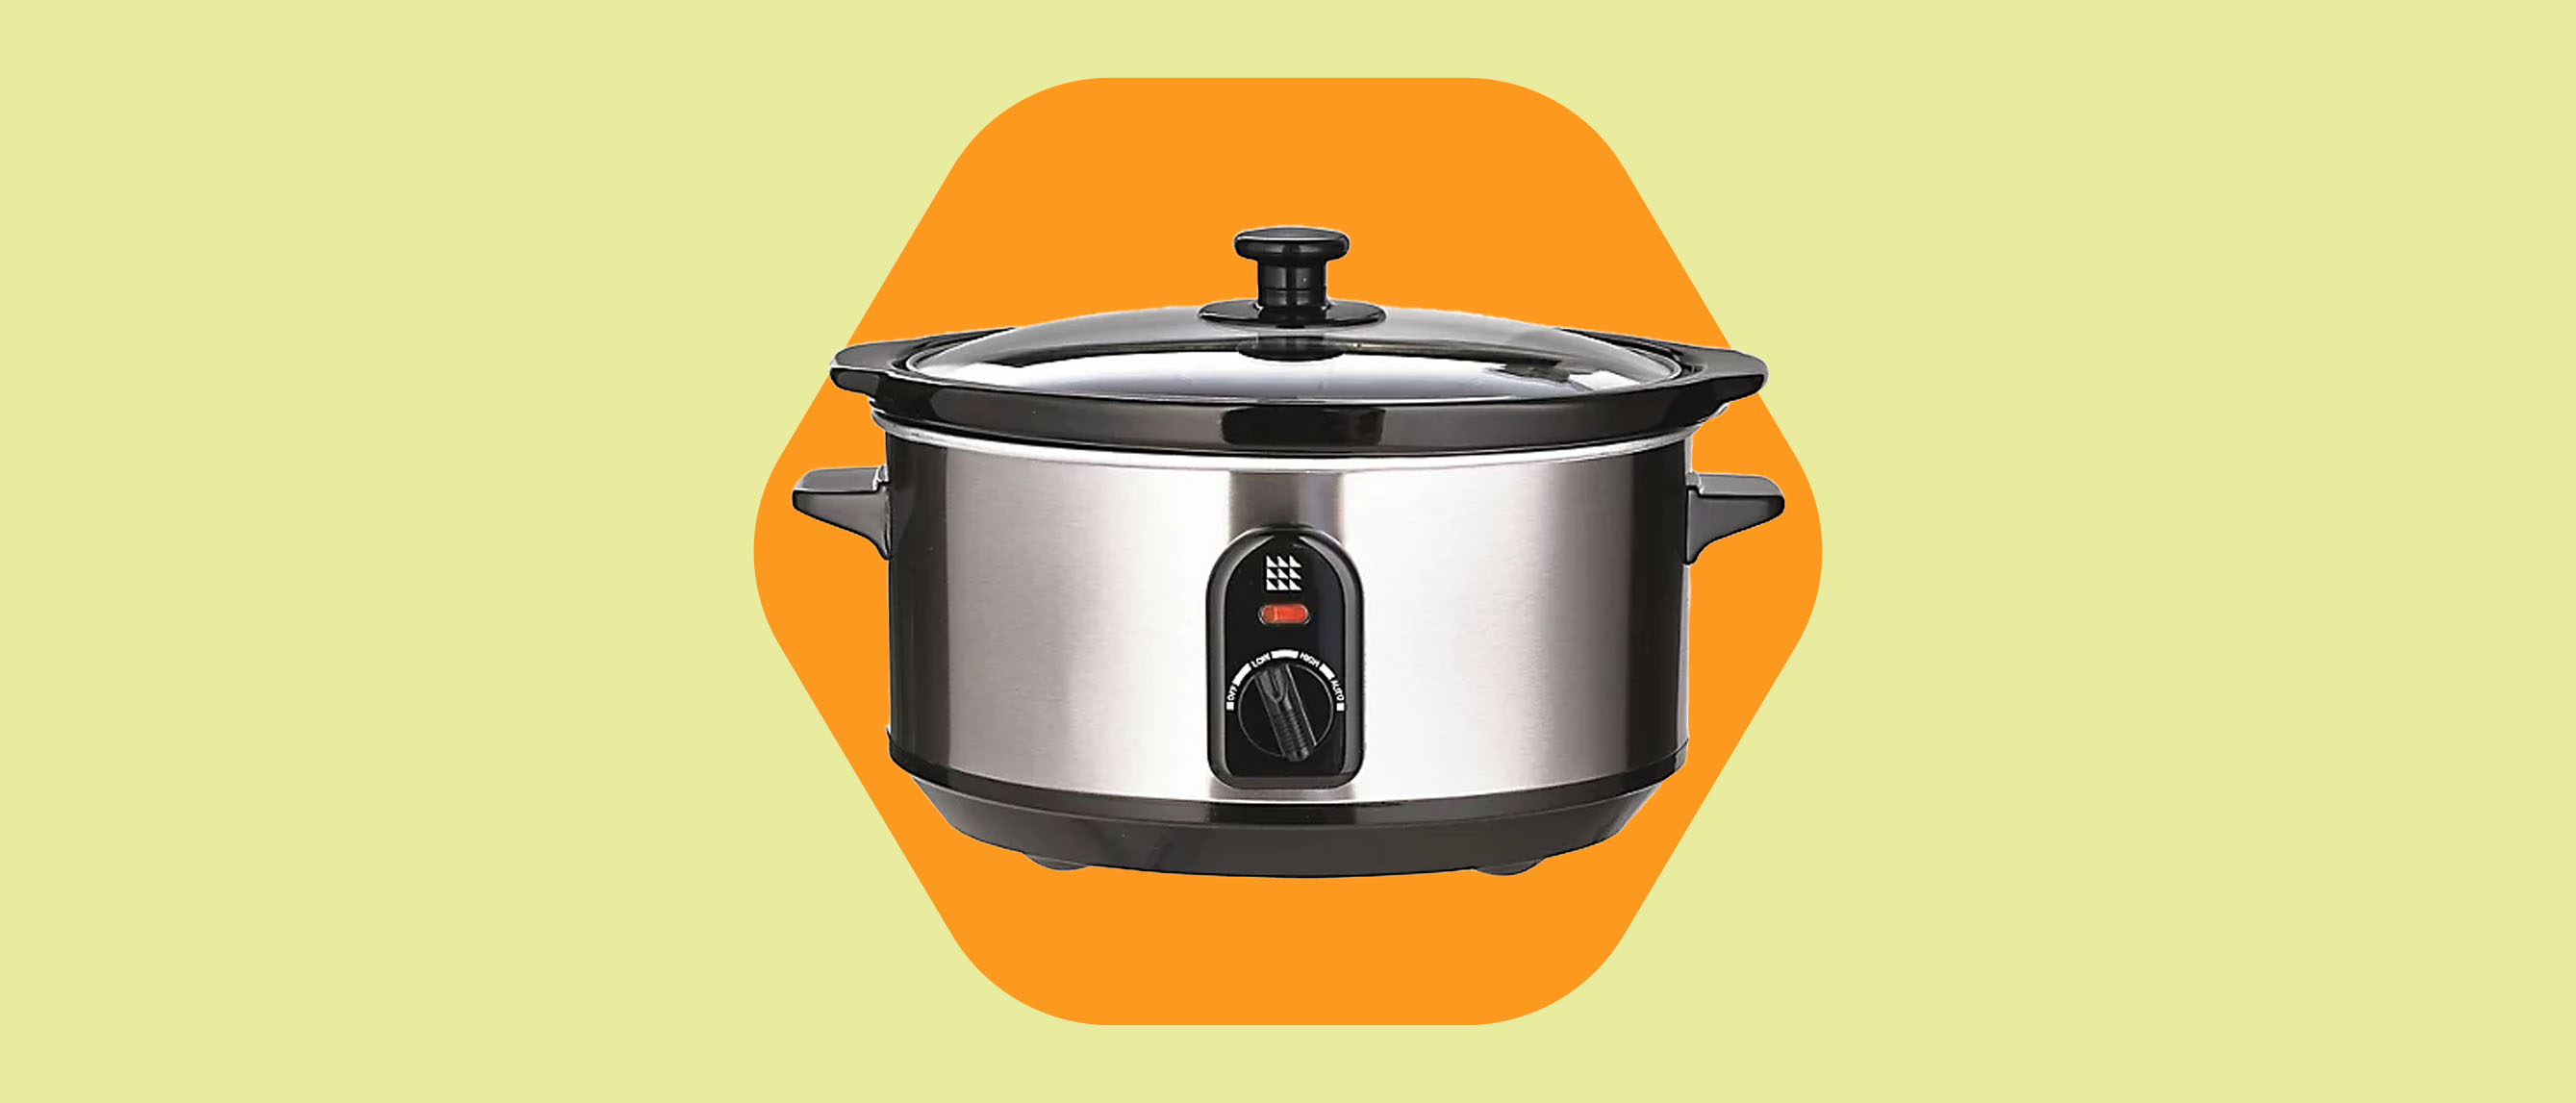 The Benefits of Slow Cooker Cooking